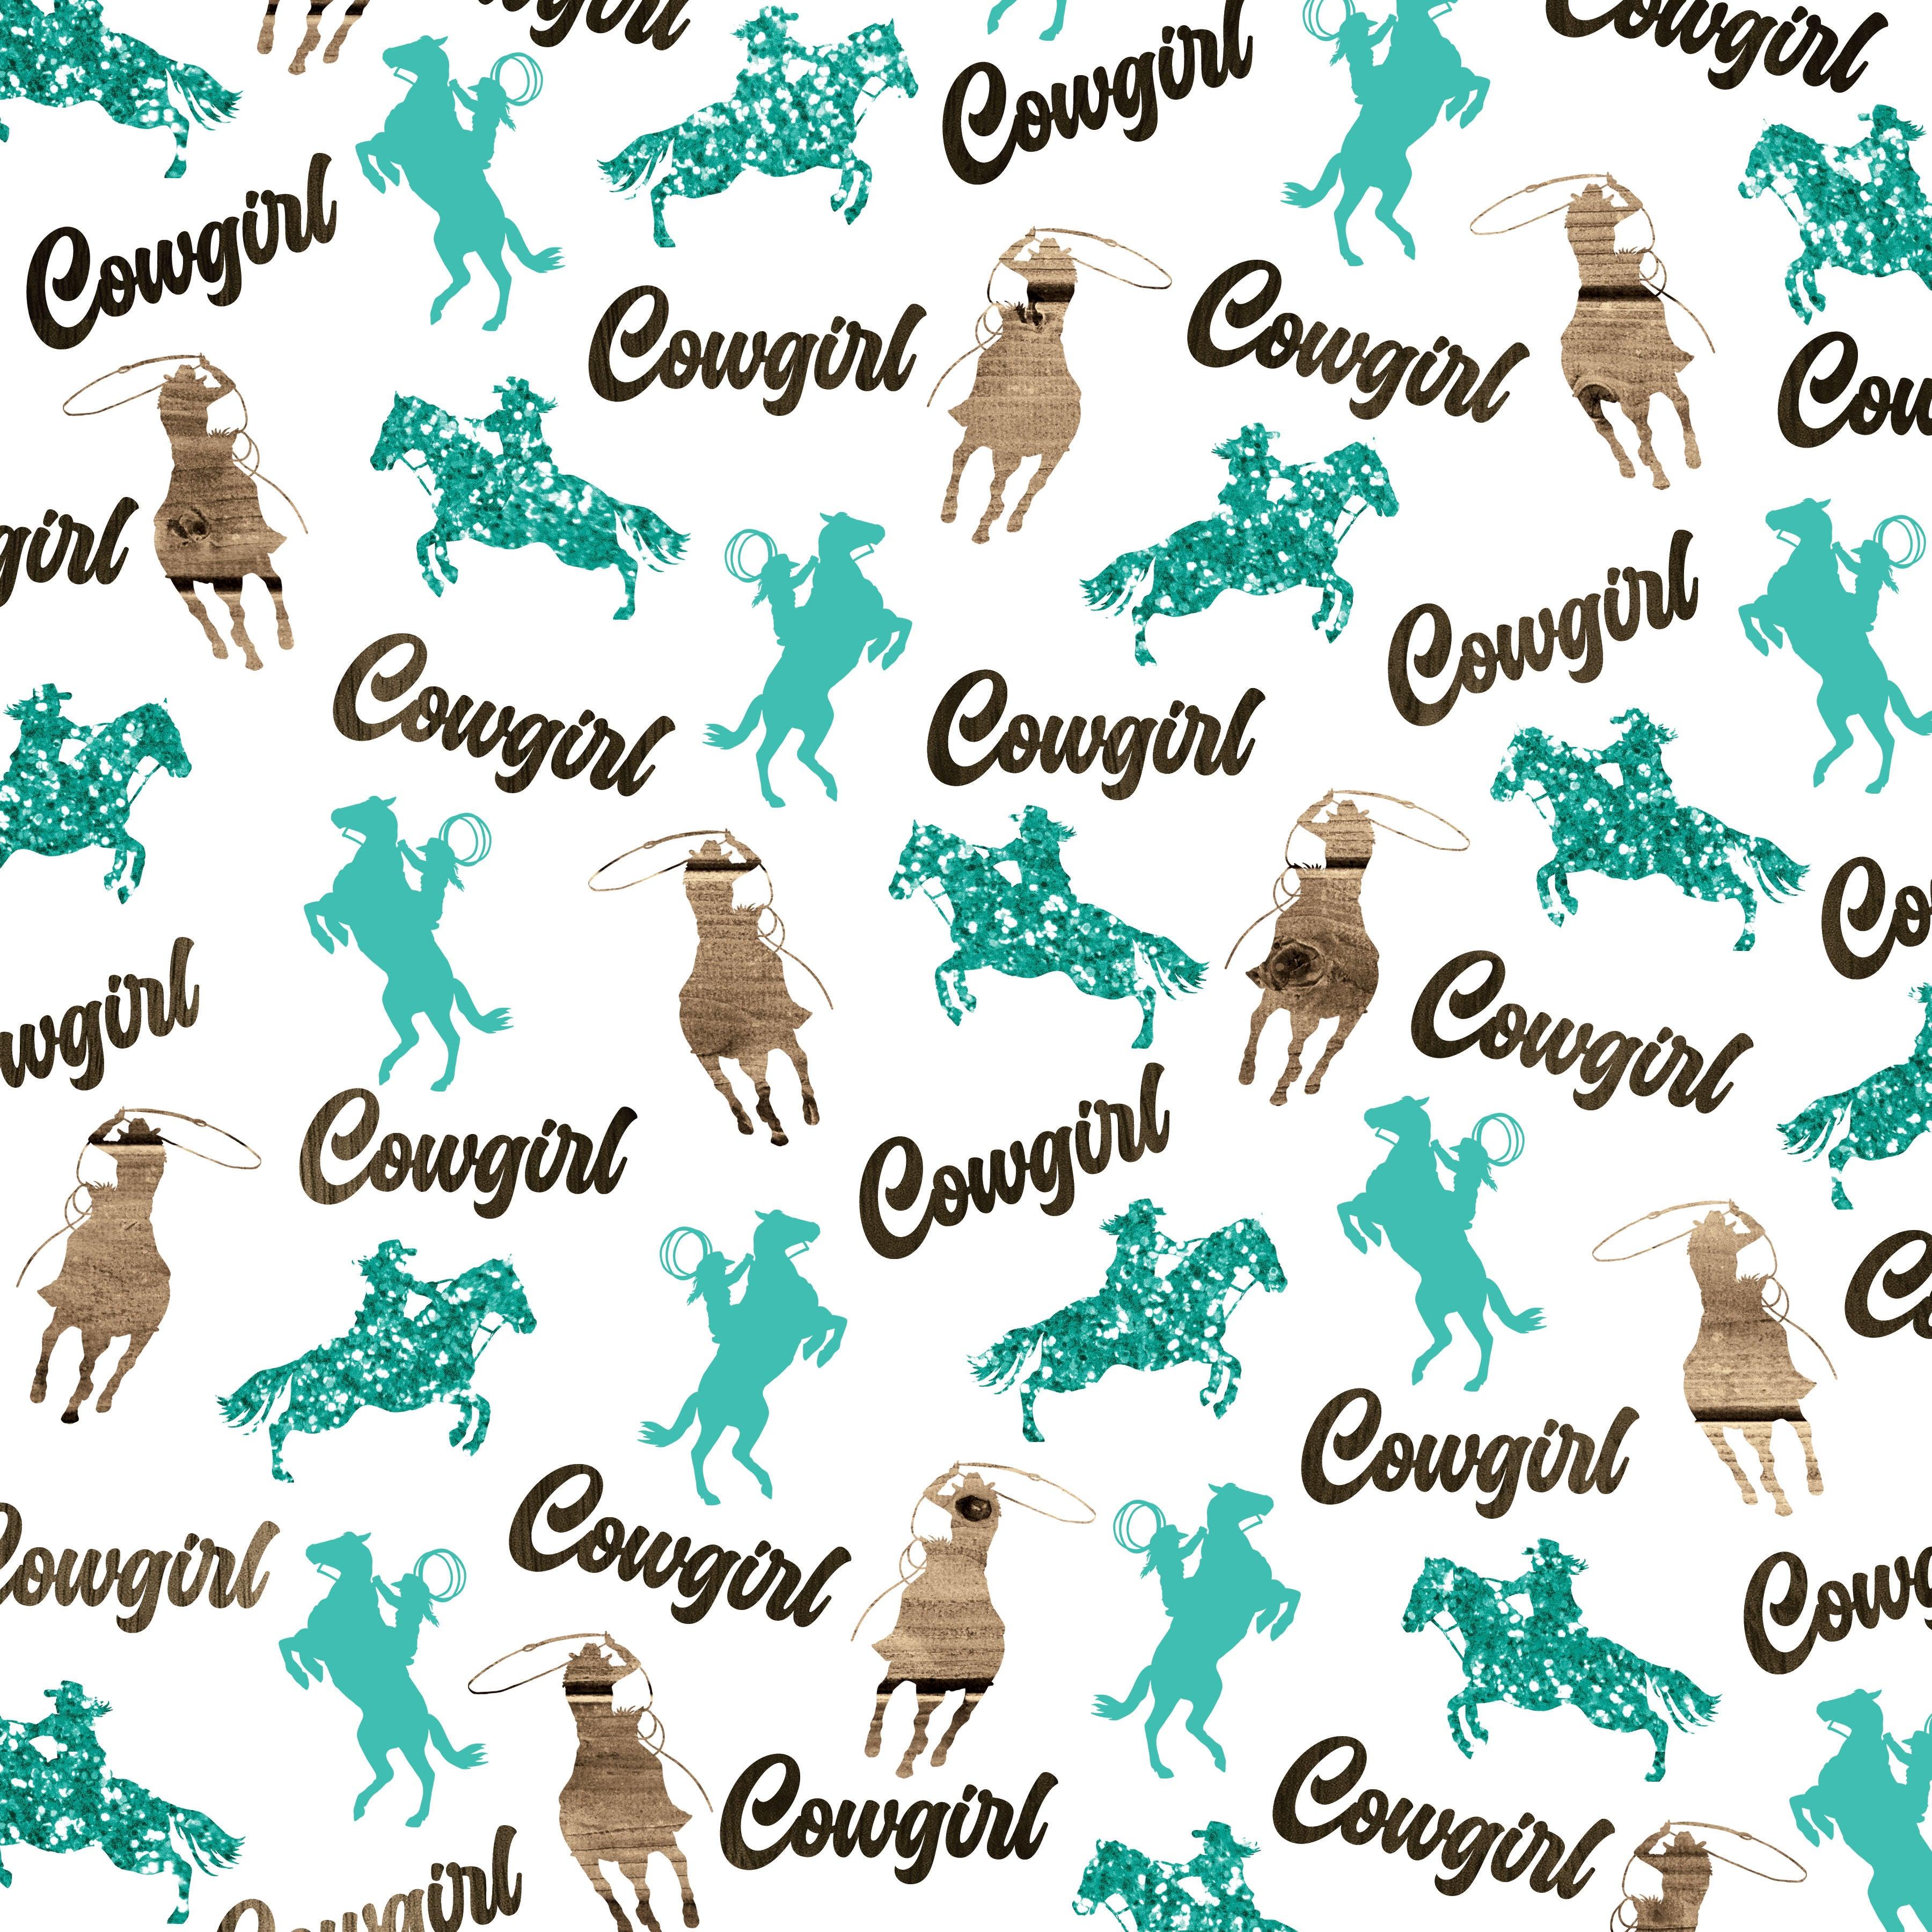 Cowgirls Collection Cowgirl 12 x 12 Double-Sided Scrapbook Paper by SSC Designs